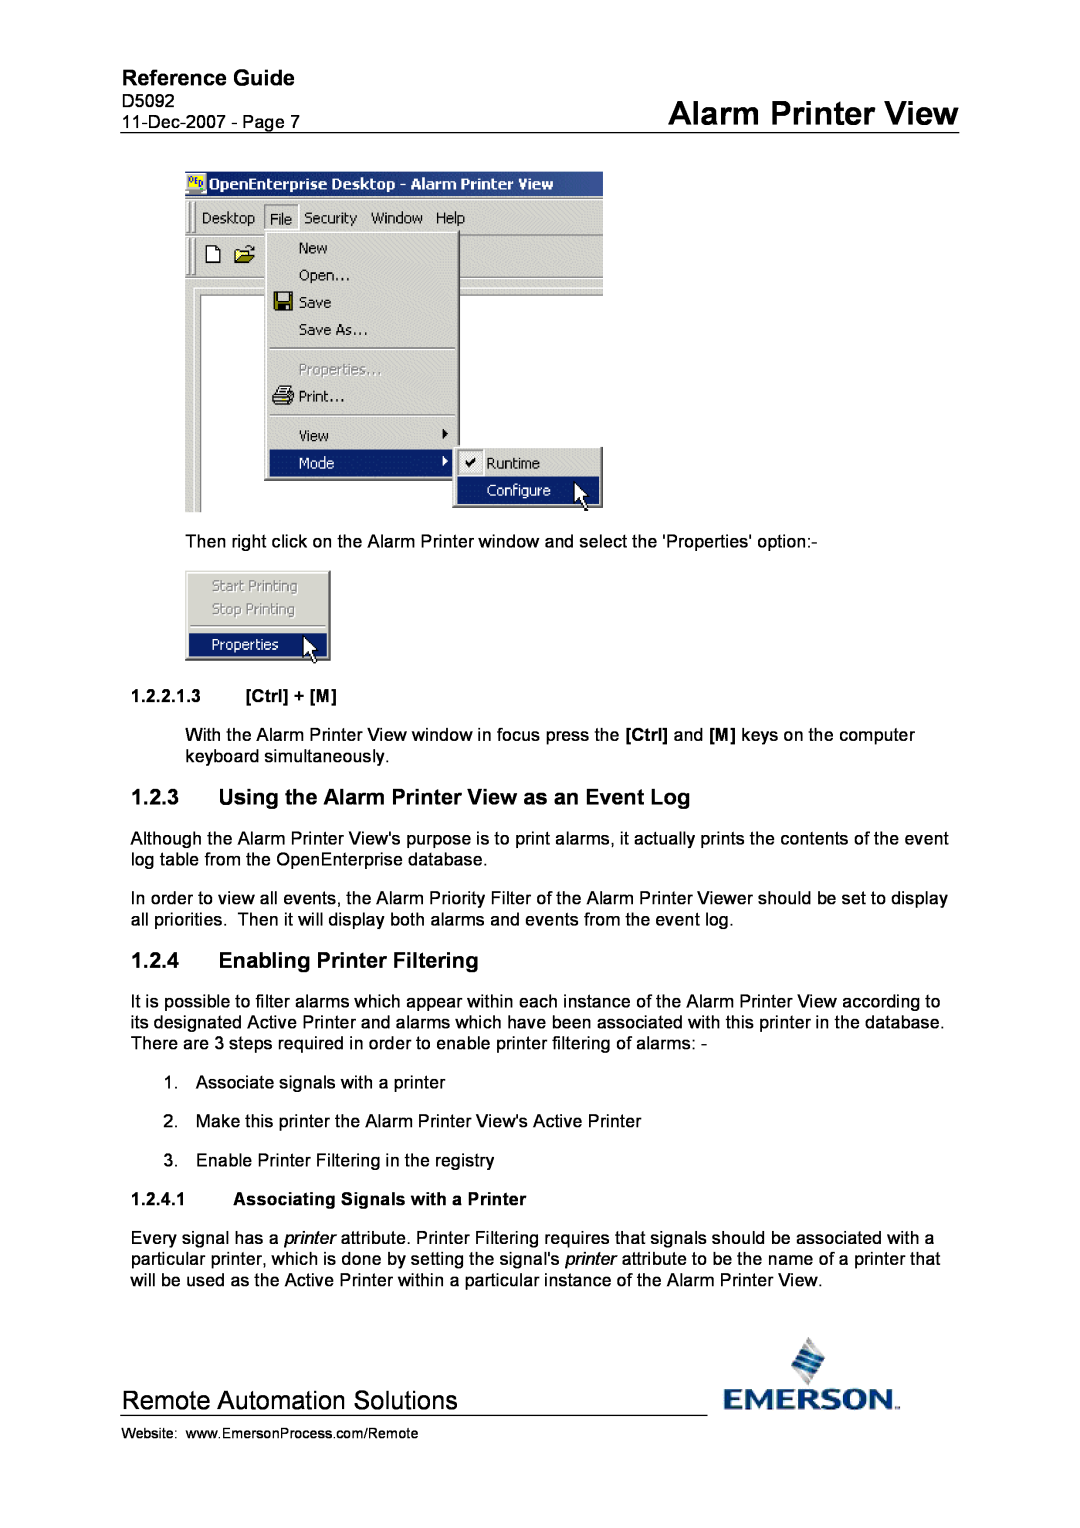 Emerson Process Management D5092 manual Using the Alarm Printer View as an Event Log, Enabling Printer Filtering, Ctrl + M 